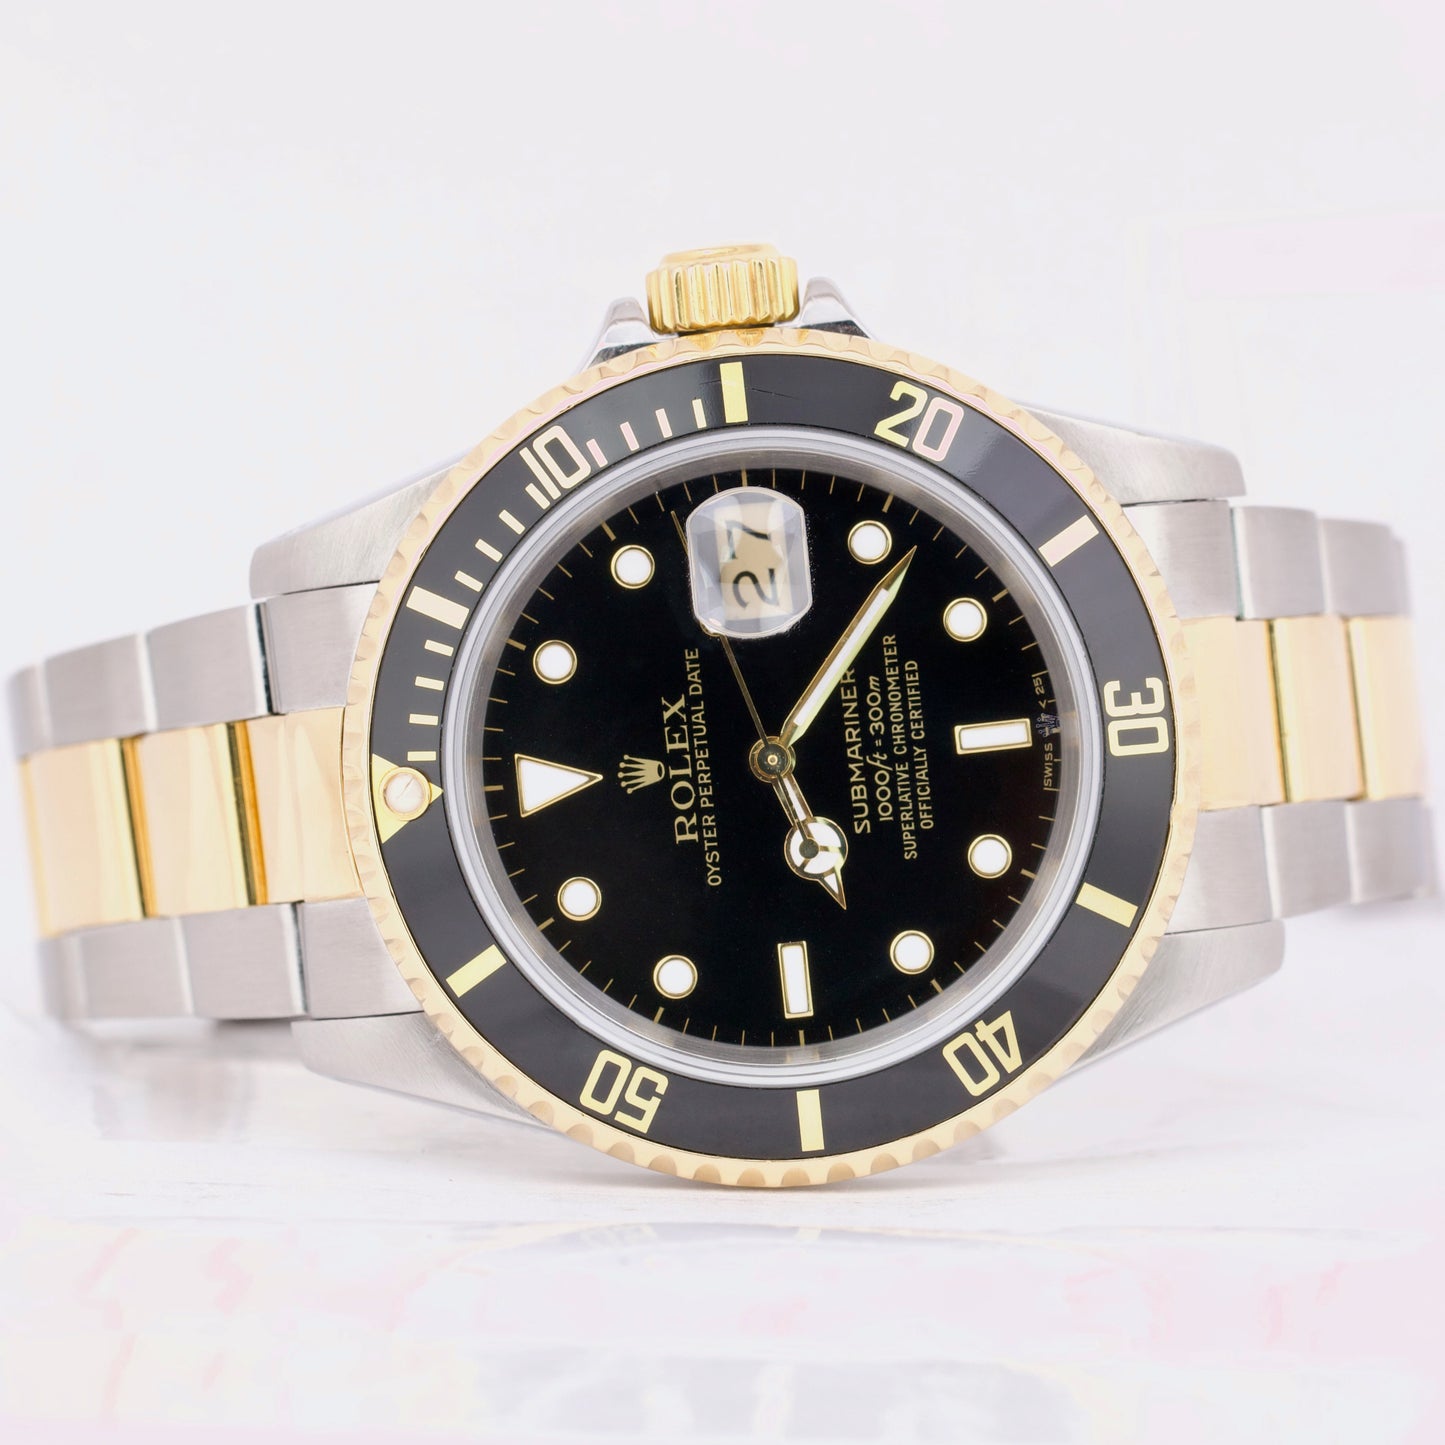 Rolex Submariner Date 40mm Black Two Tone 18K Gold Stainless Steel 16613 Watch